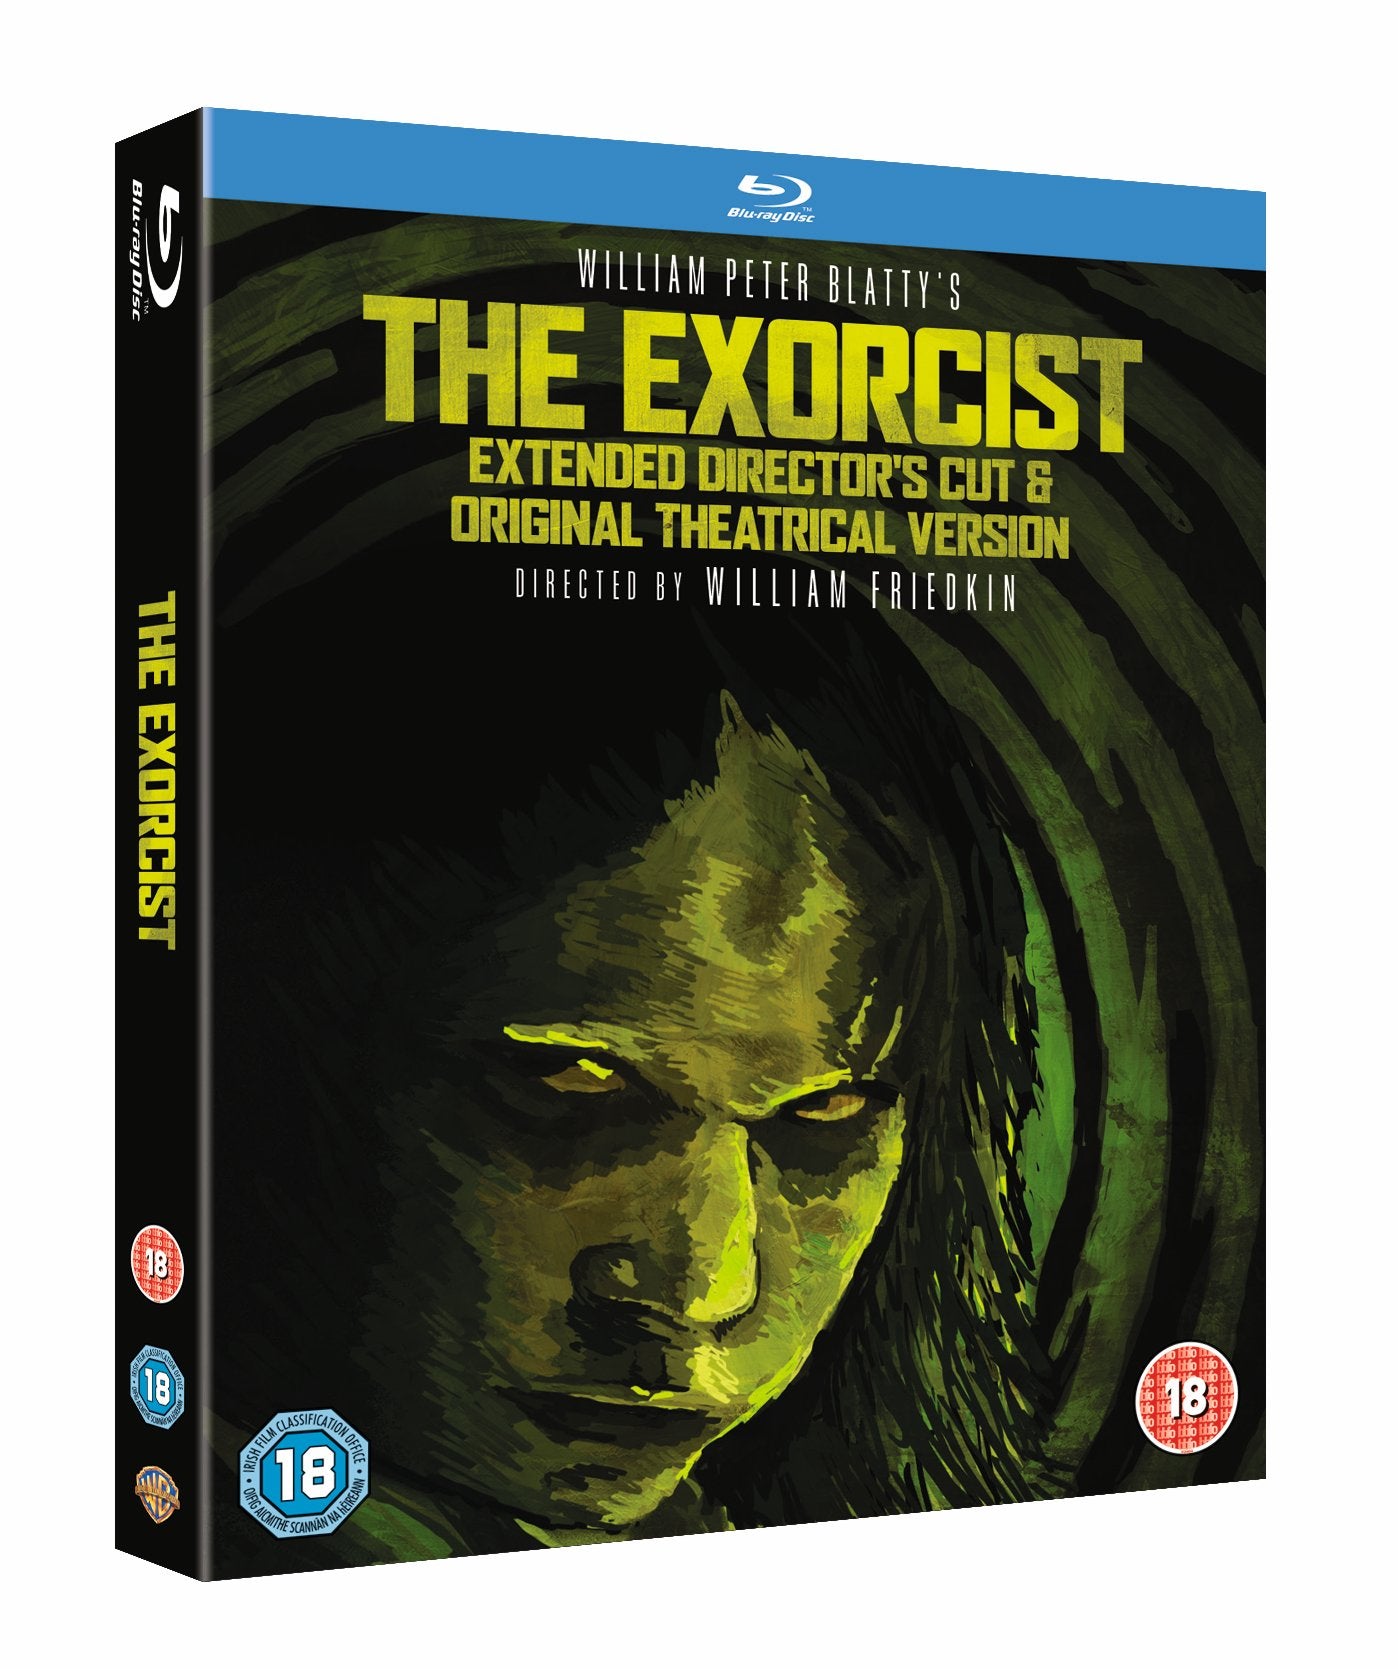 The Exorcist [1973] (Blu-ray)